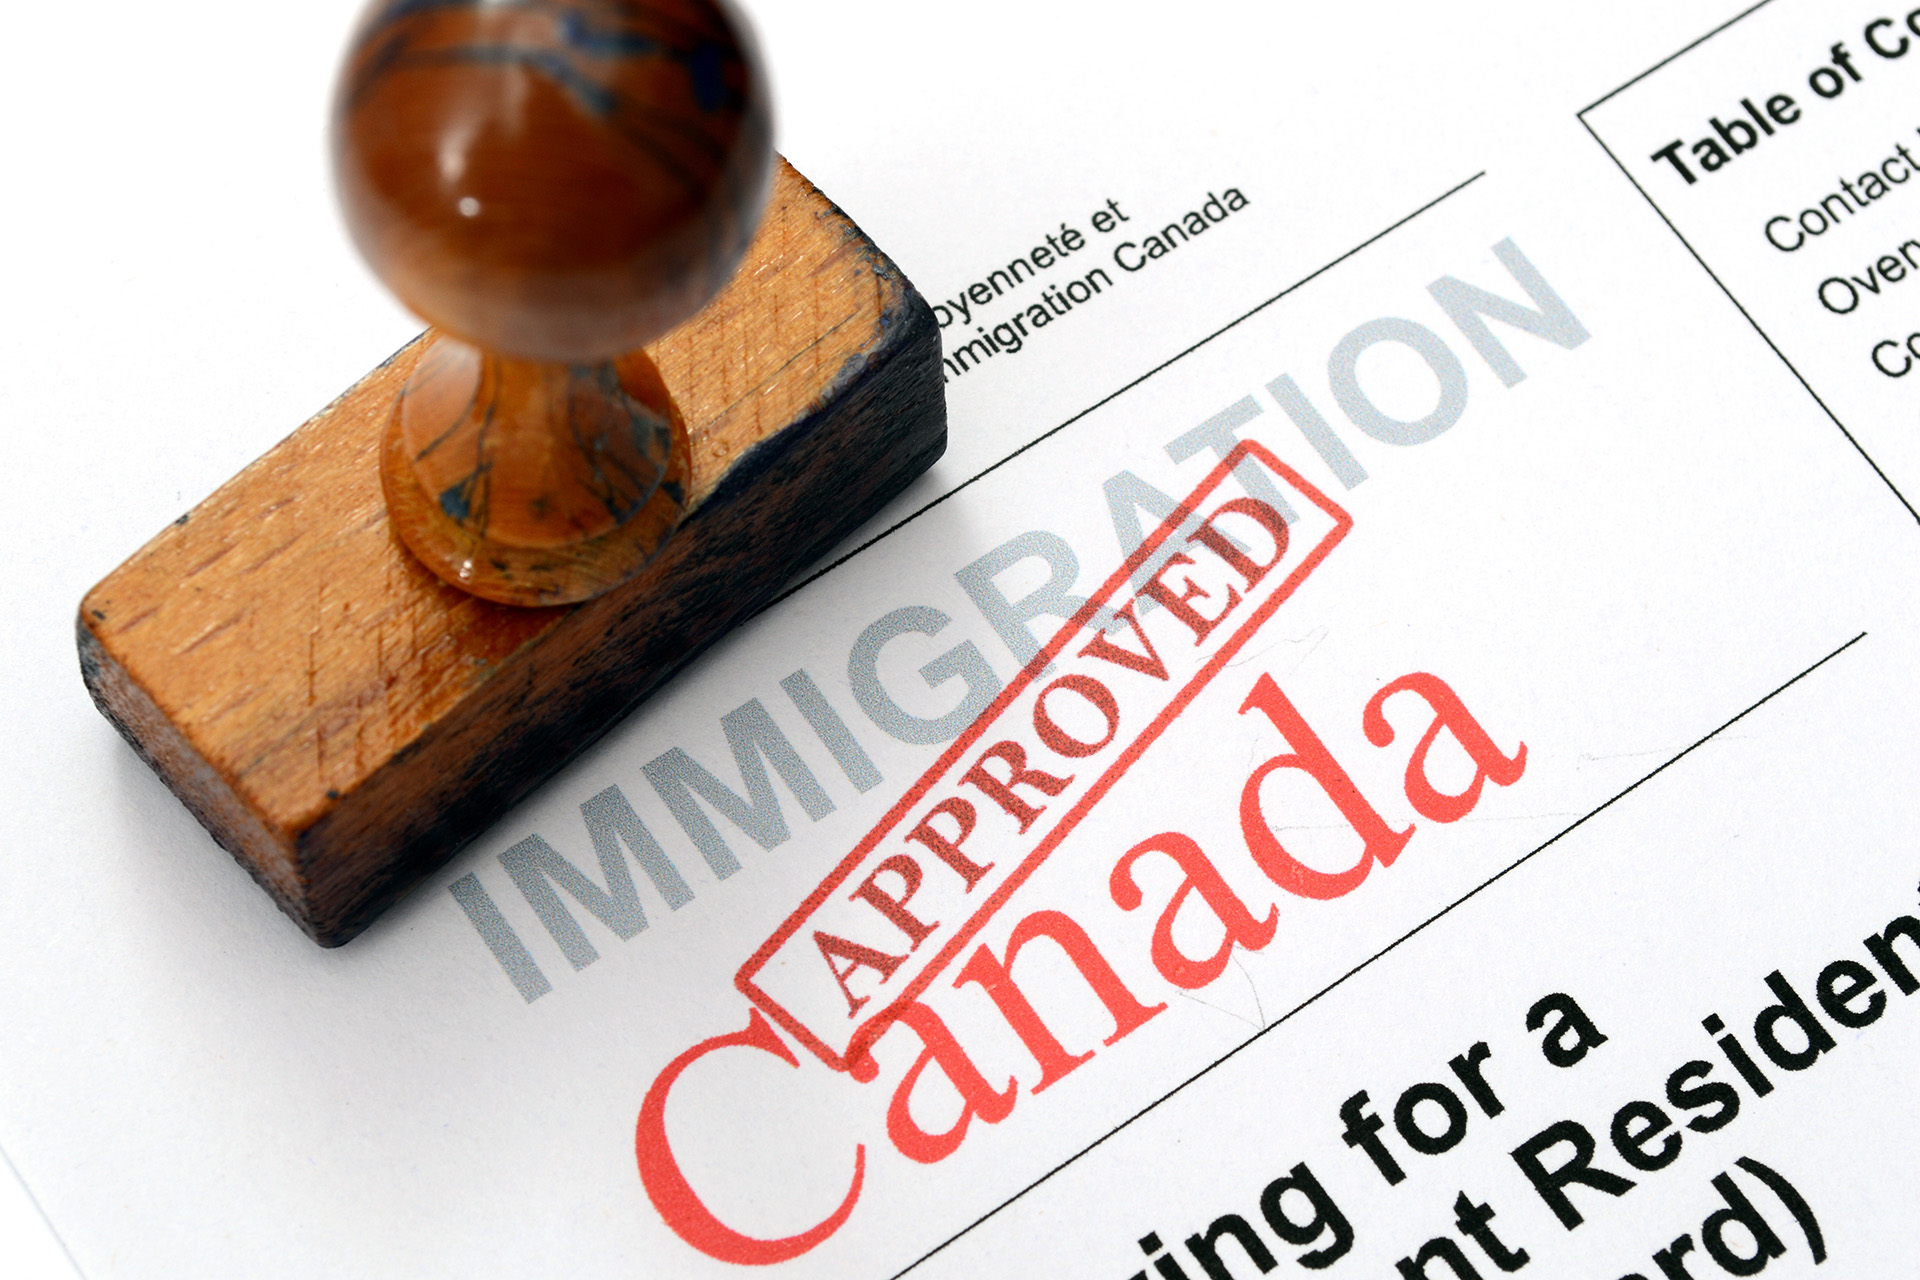 Photo: Immigrate to Canada Application Stamped